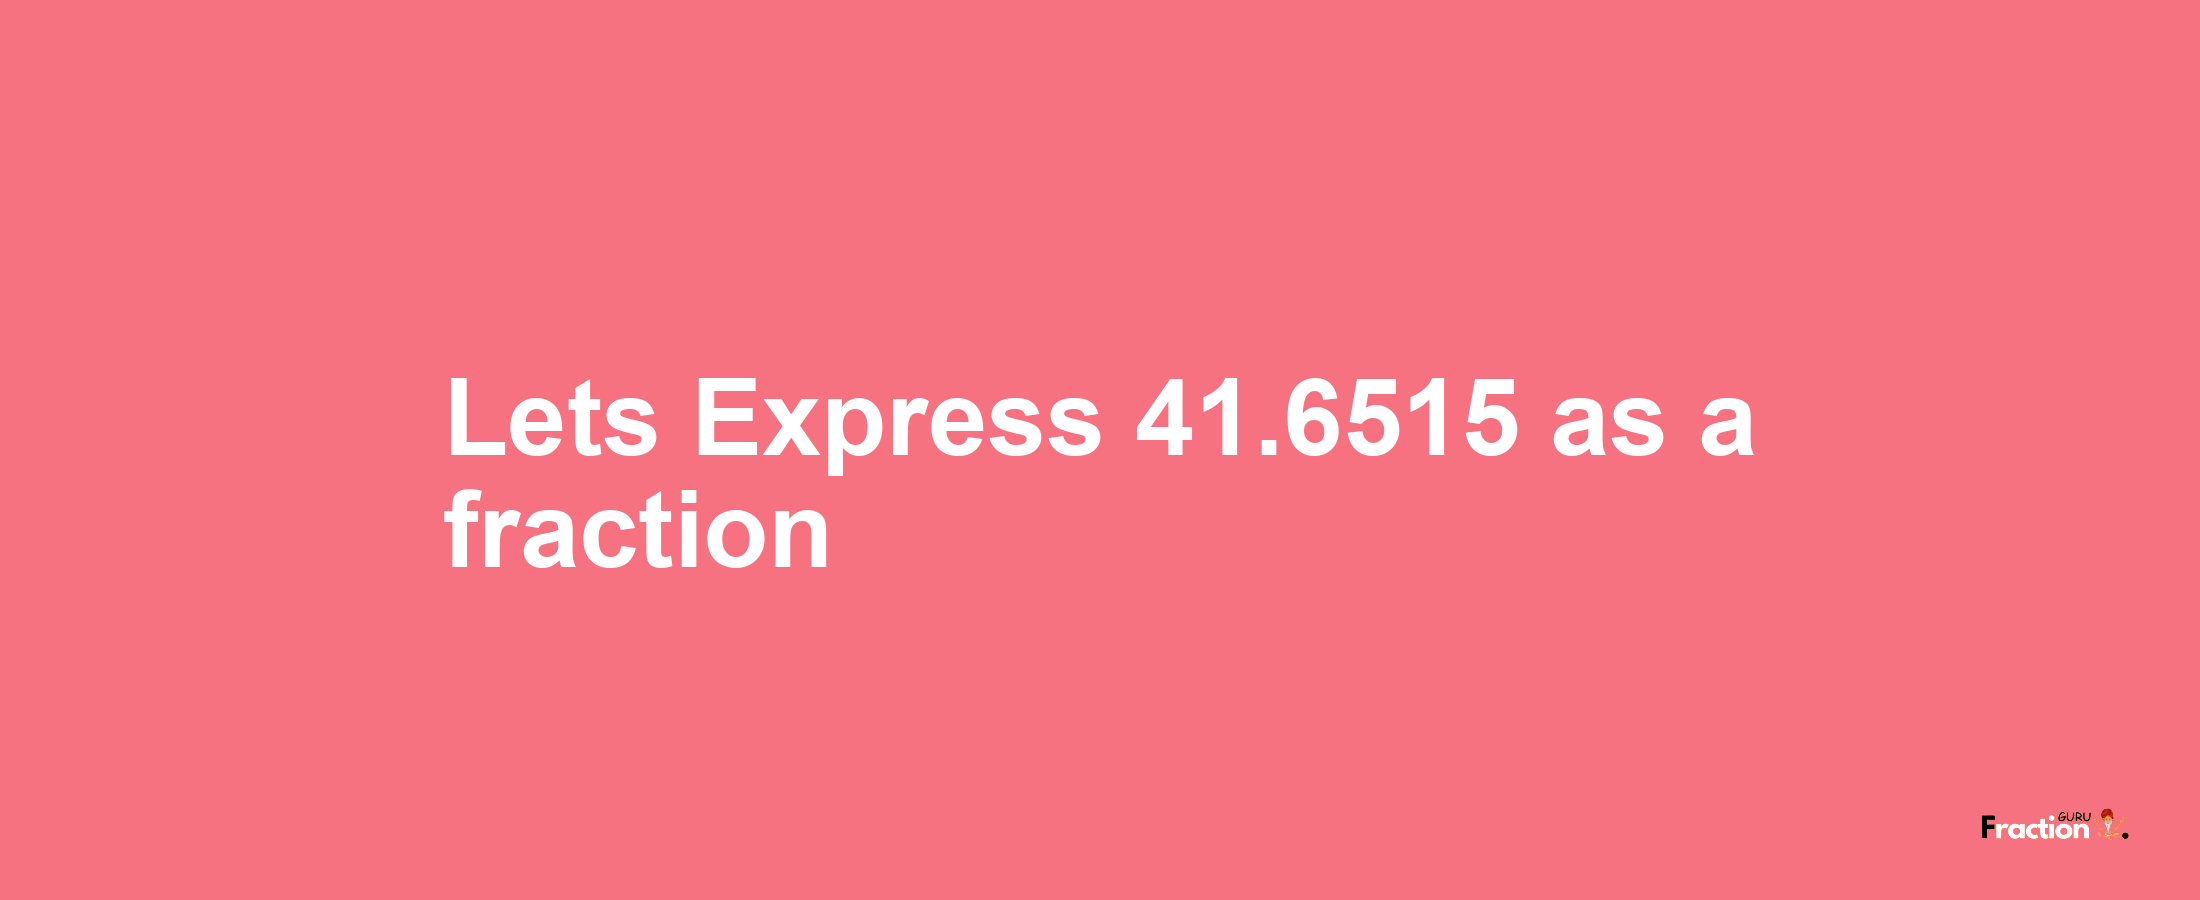 Lets Express 41.6515 as afraction